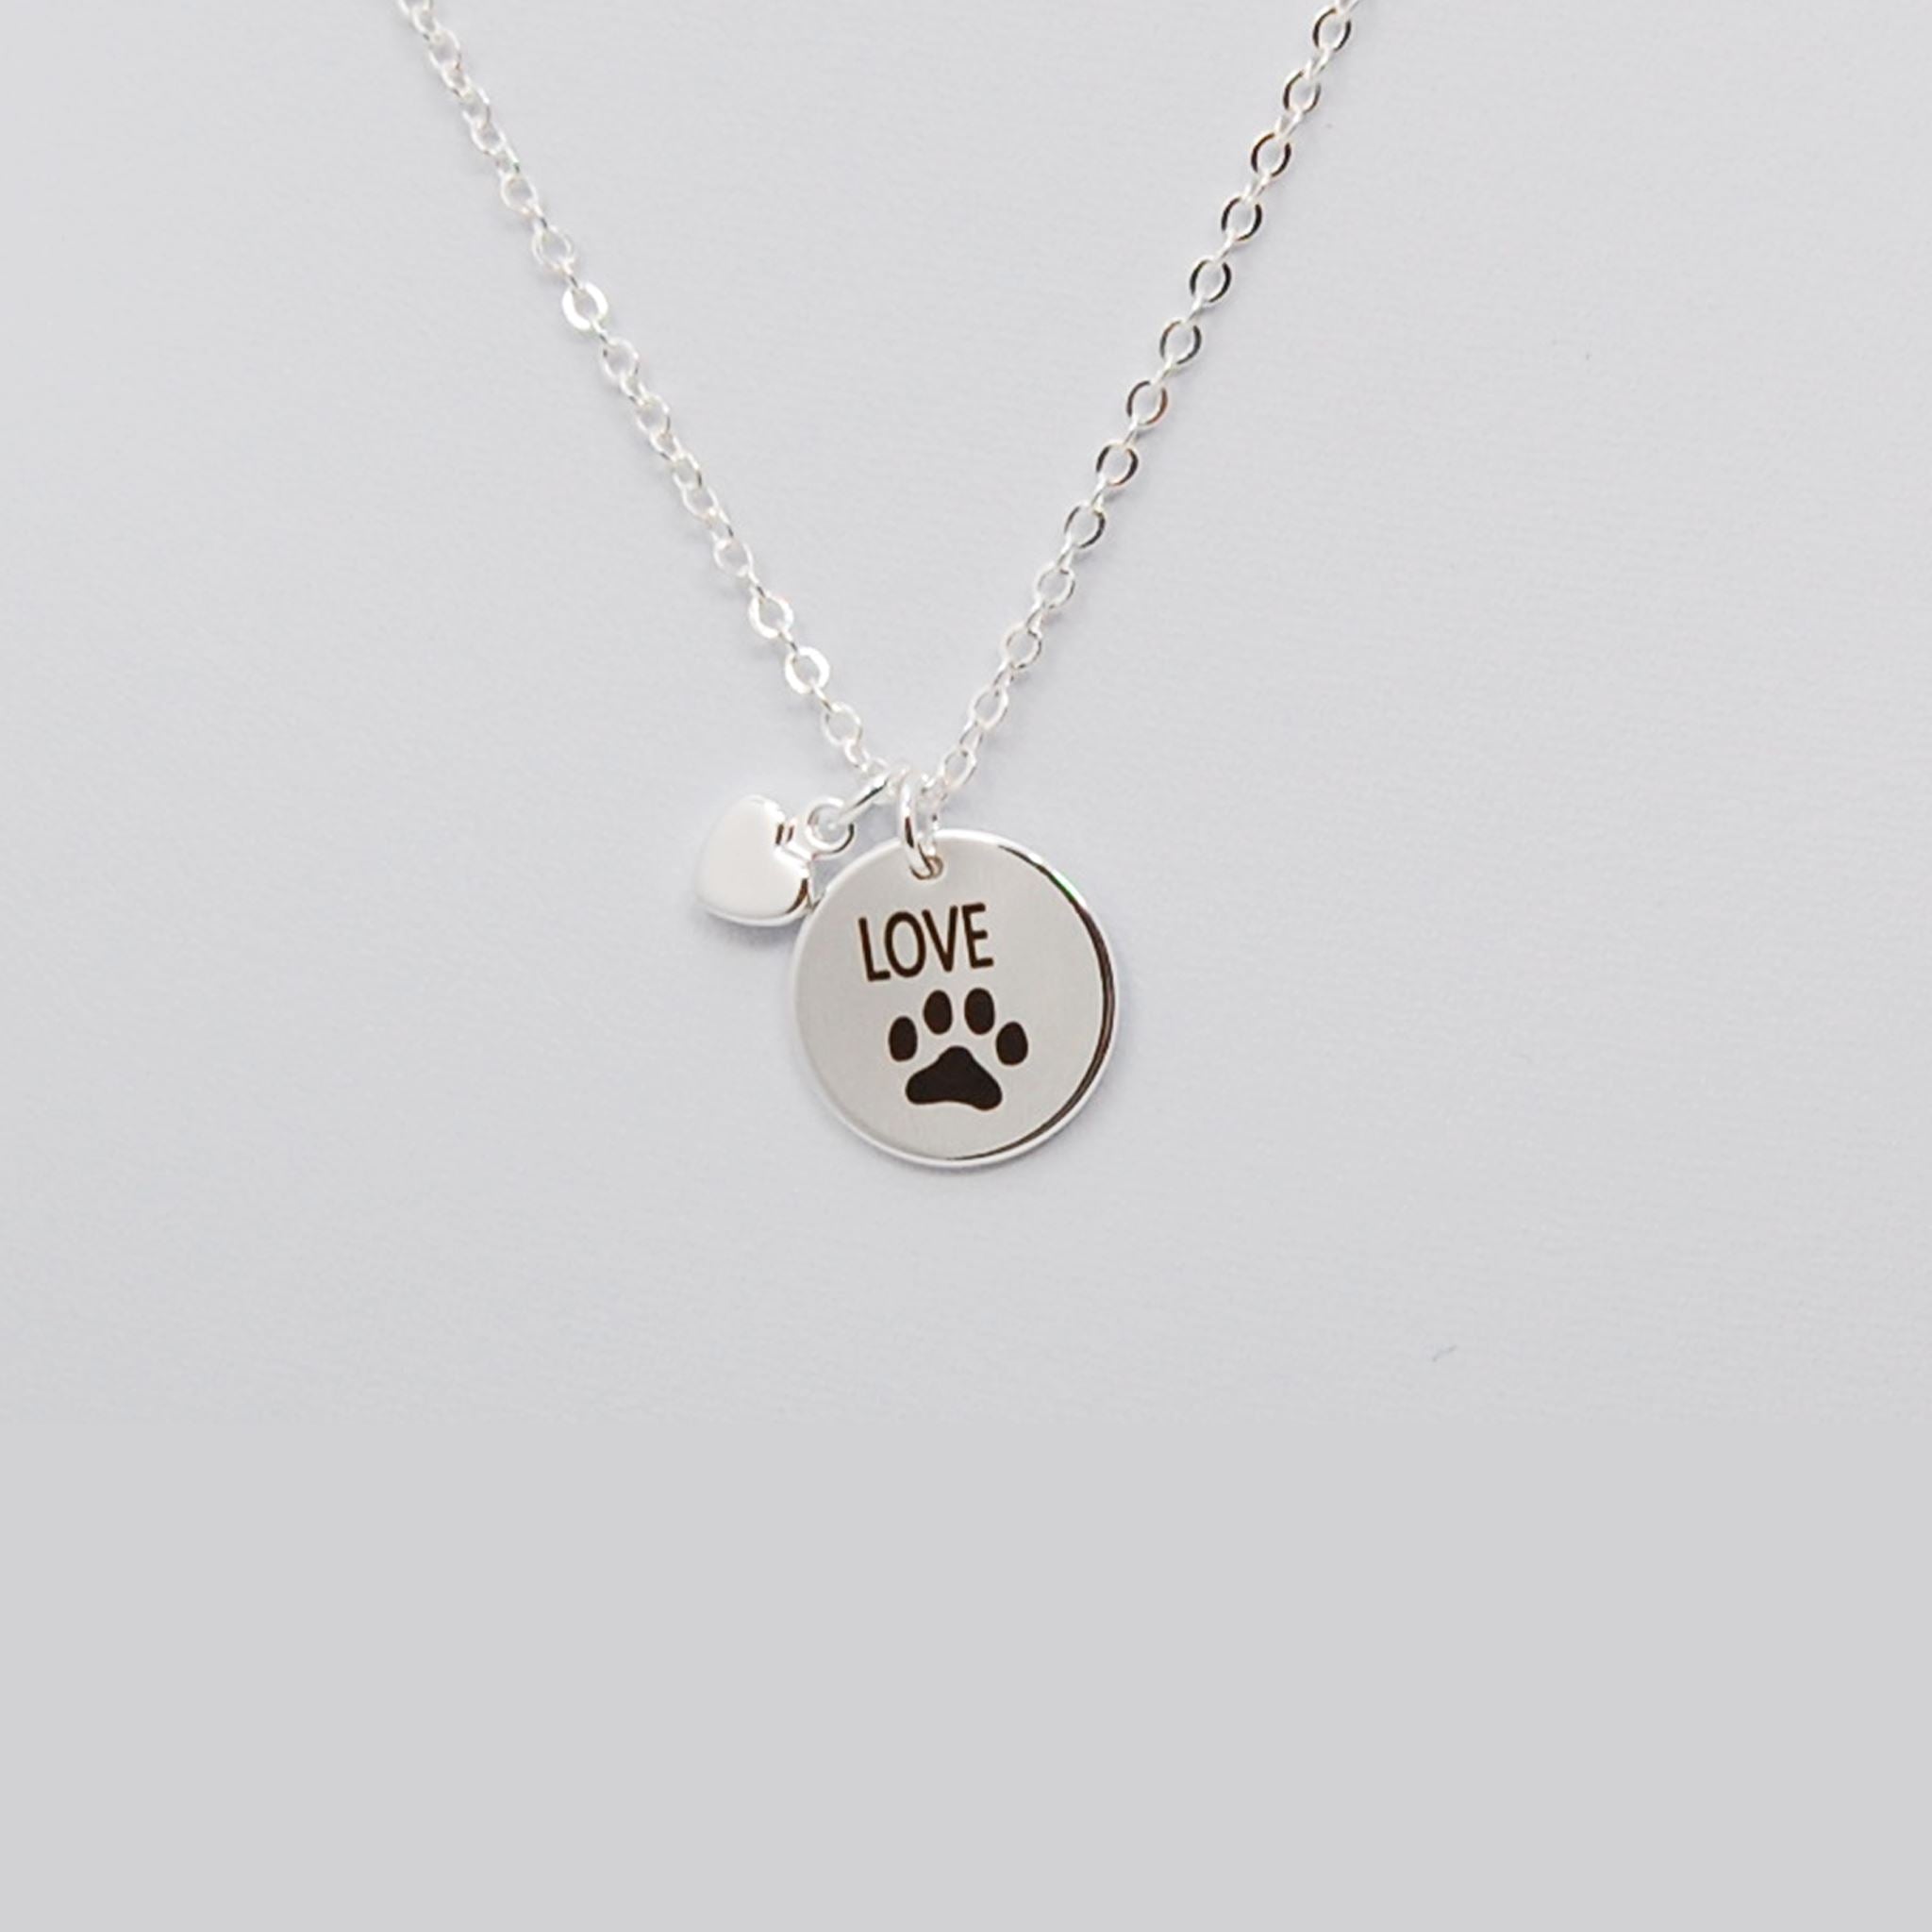 Love Paw Necklace Necklace 